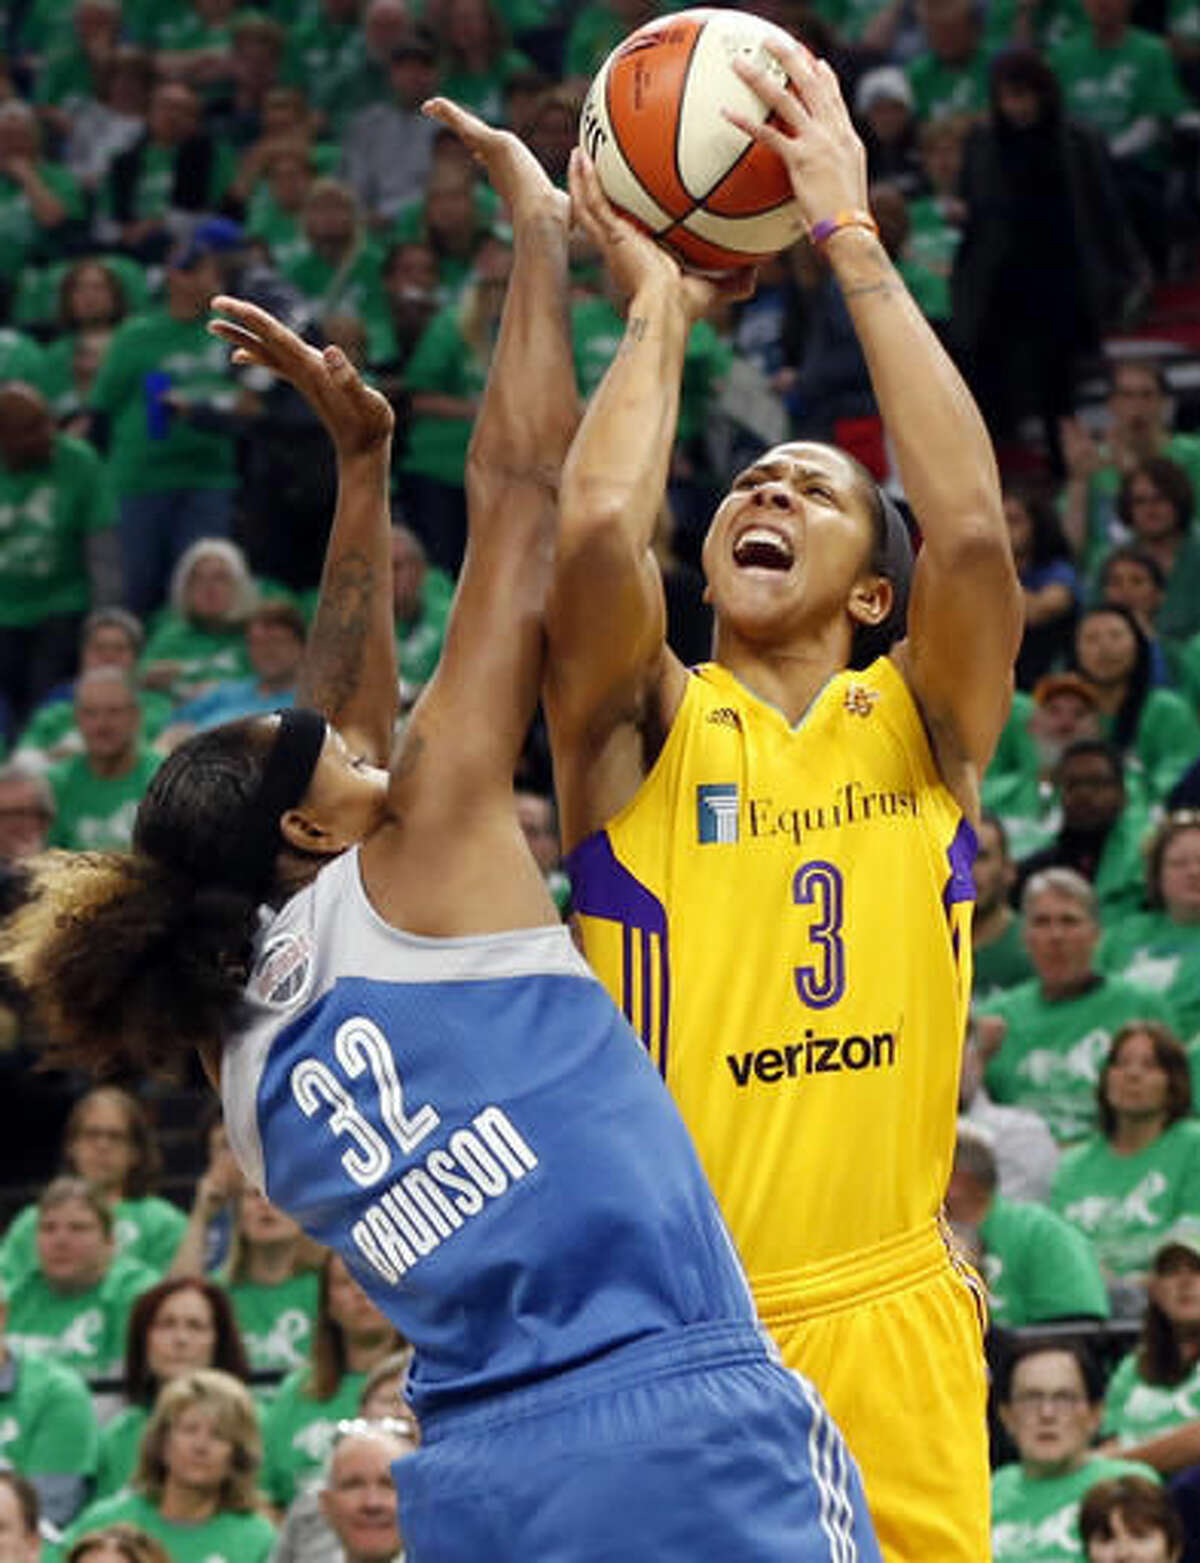 Los Angeles Sparks' Candace Parker, right, attempts to shoot over Minnesota Lynx's Rebekkah Brunson in the first quarter during Game 5 of the WNBA basketball finals Thursday, Oct. 20, 2016, in Minneapolis. (AP Photo/Jim Mone)